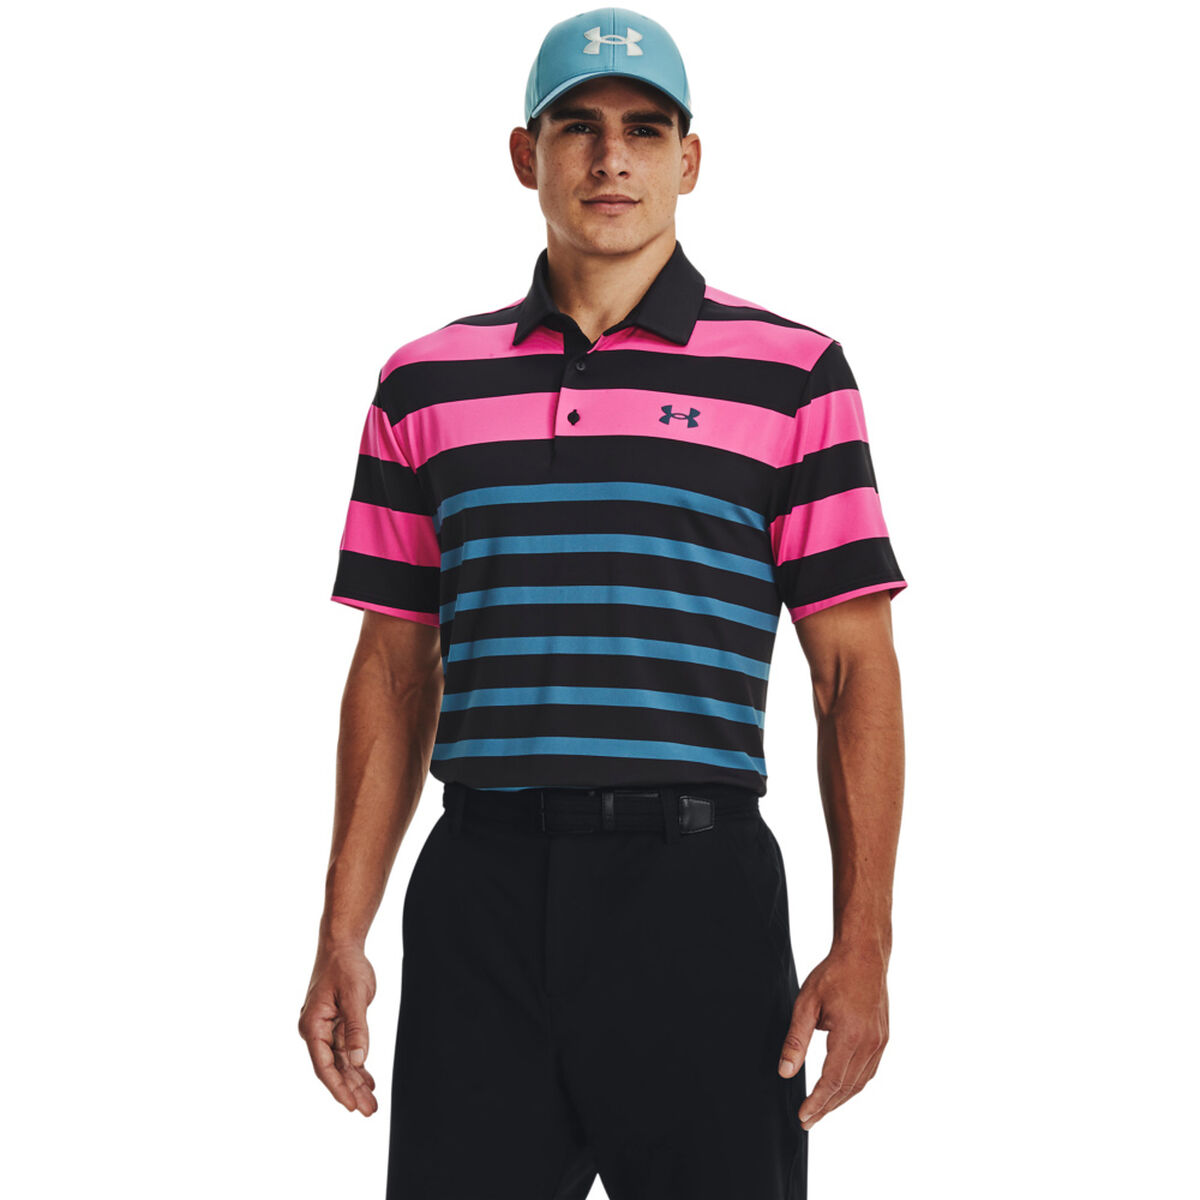 Under Armour Men’s Playoff 3.0 Rugby YD Stripe Golf Polo Shirt, Mens, Black/pink/blue, Xs | American Golf